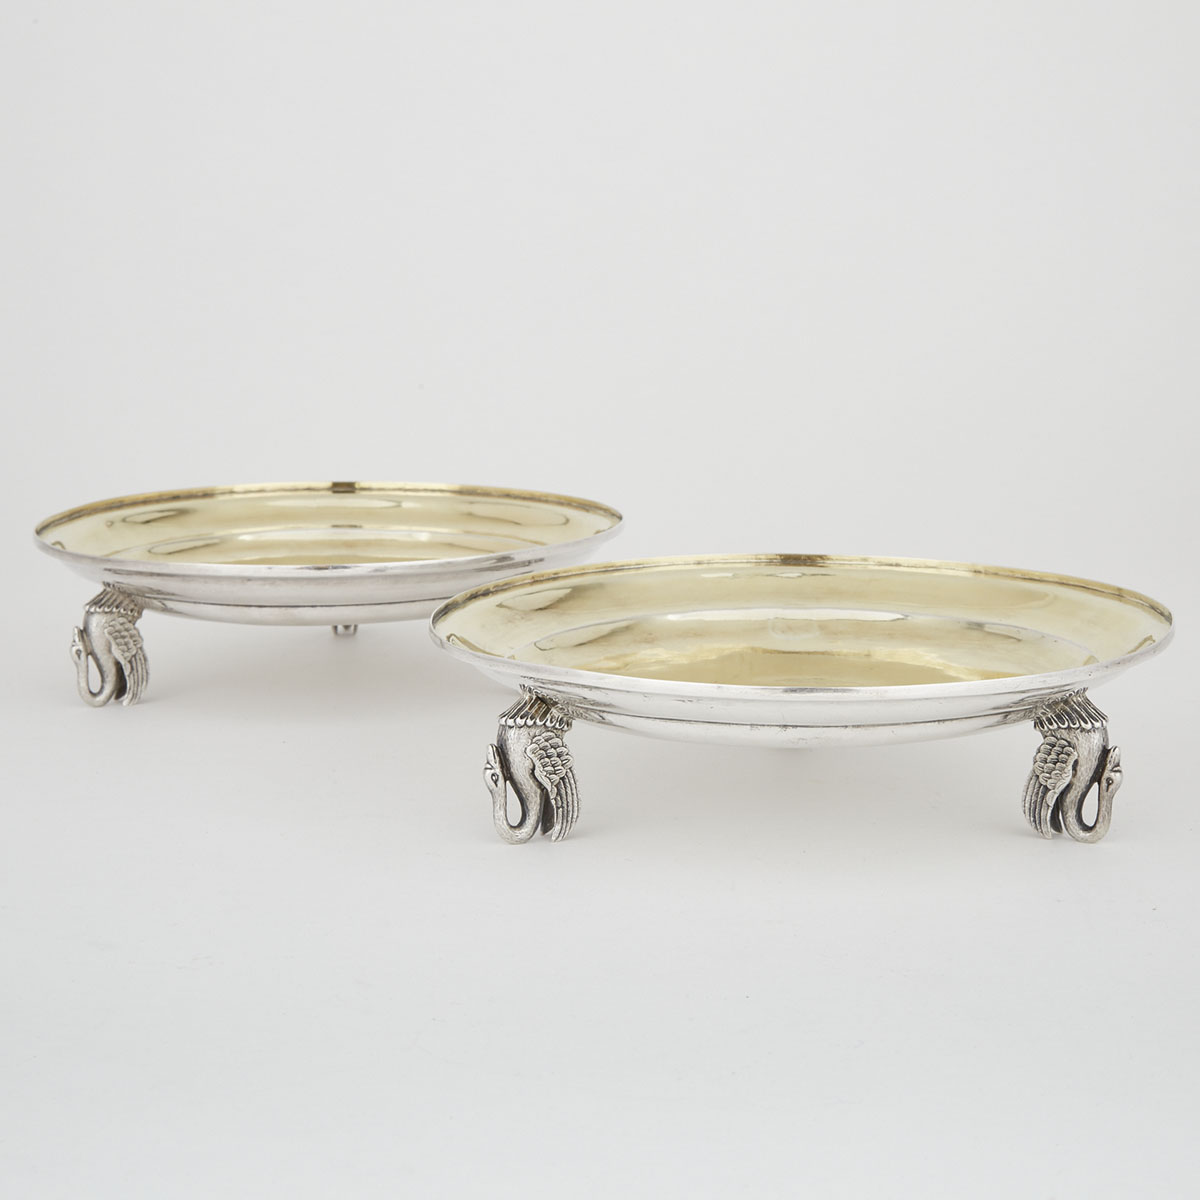 Pair of Continental Silver Parcel-Gilt Circular Dishes, probably German, late 19th century